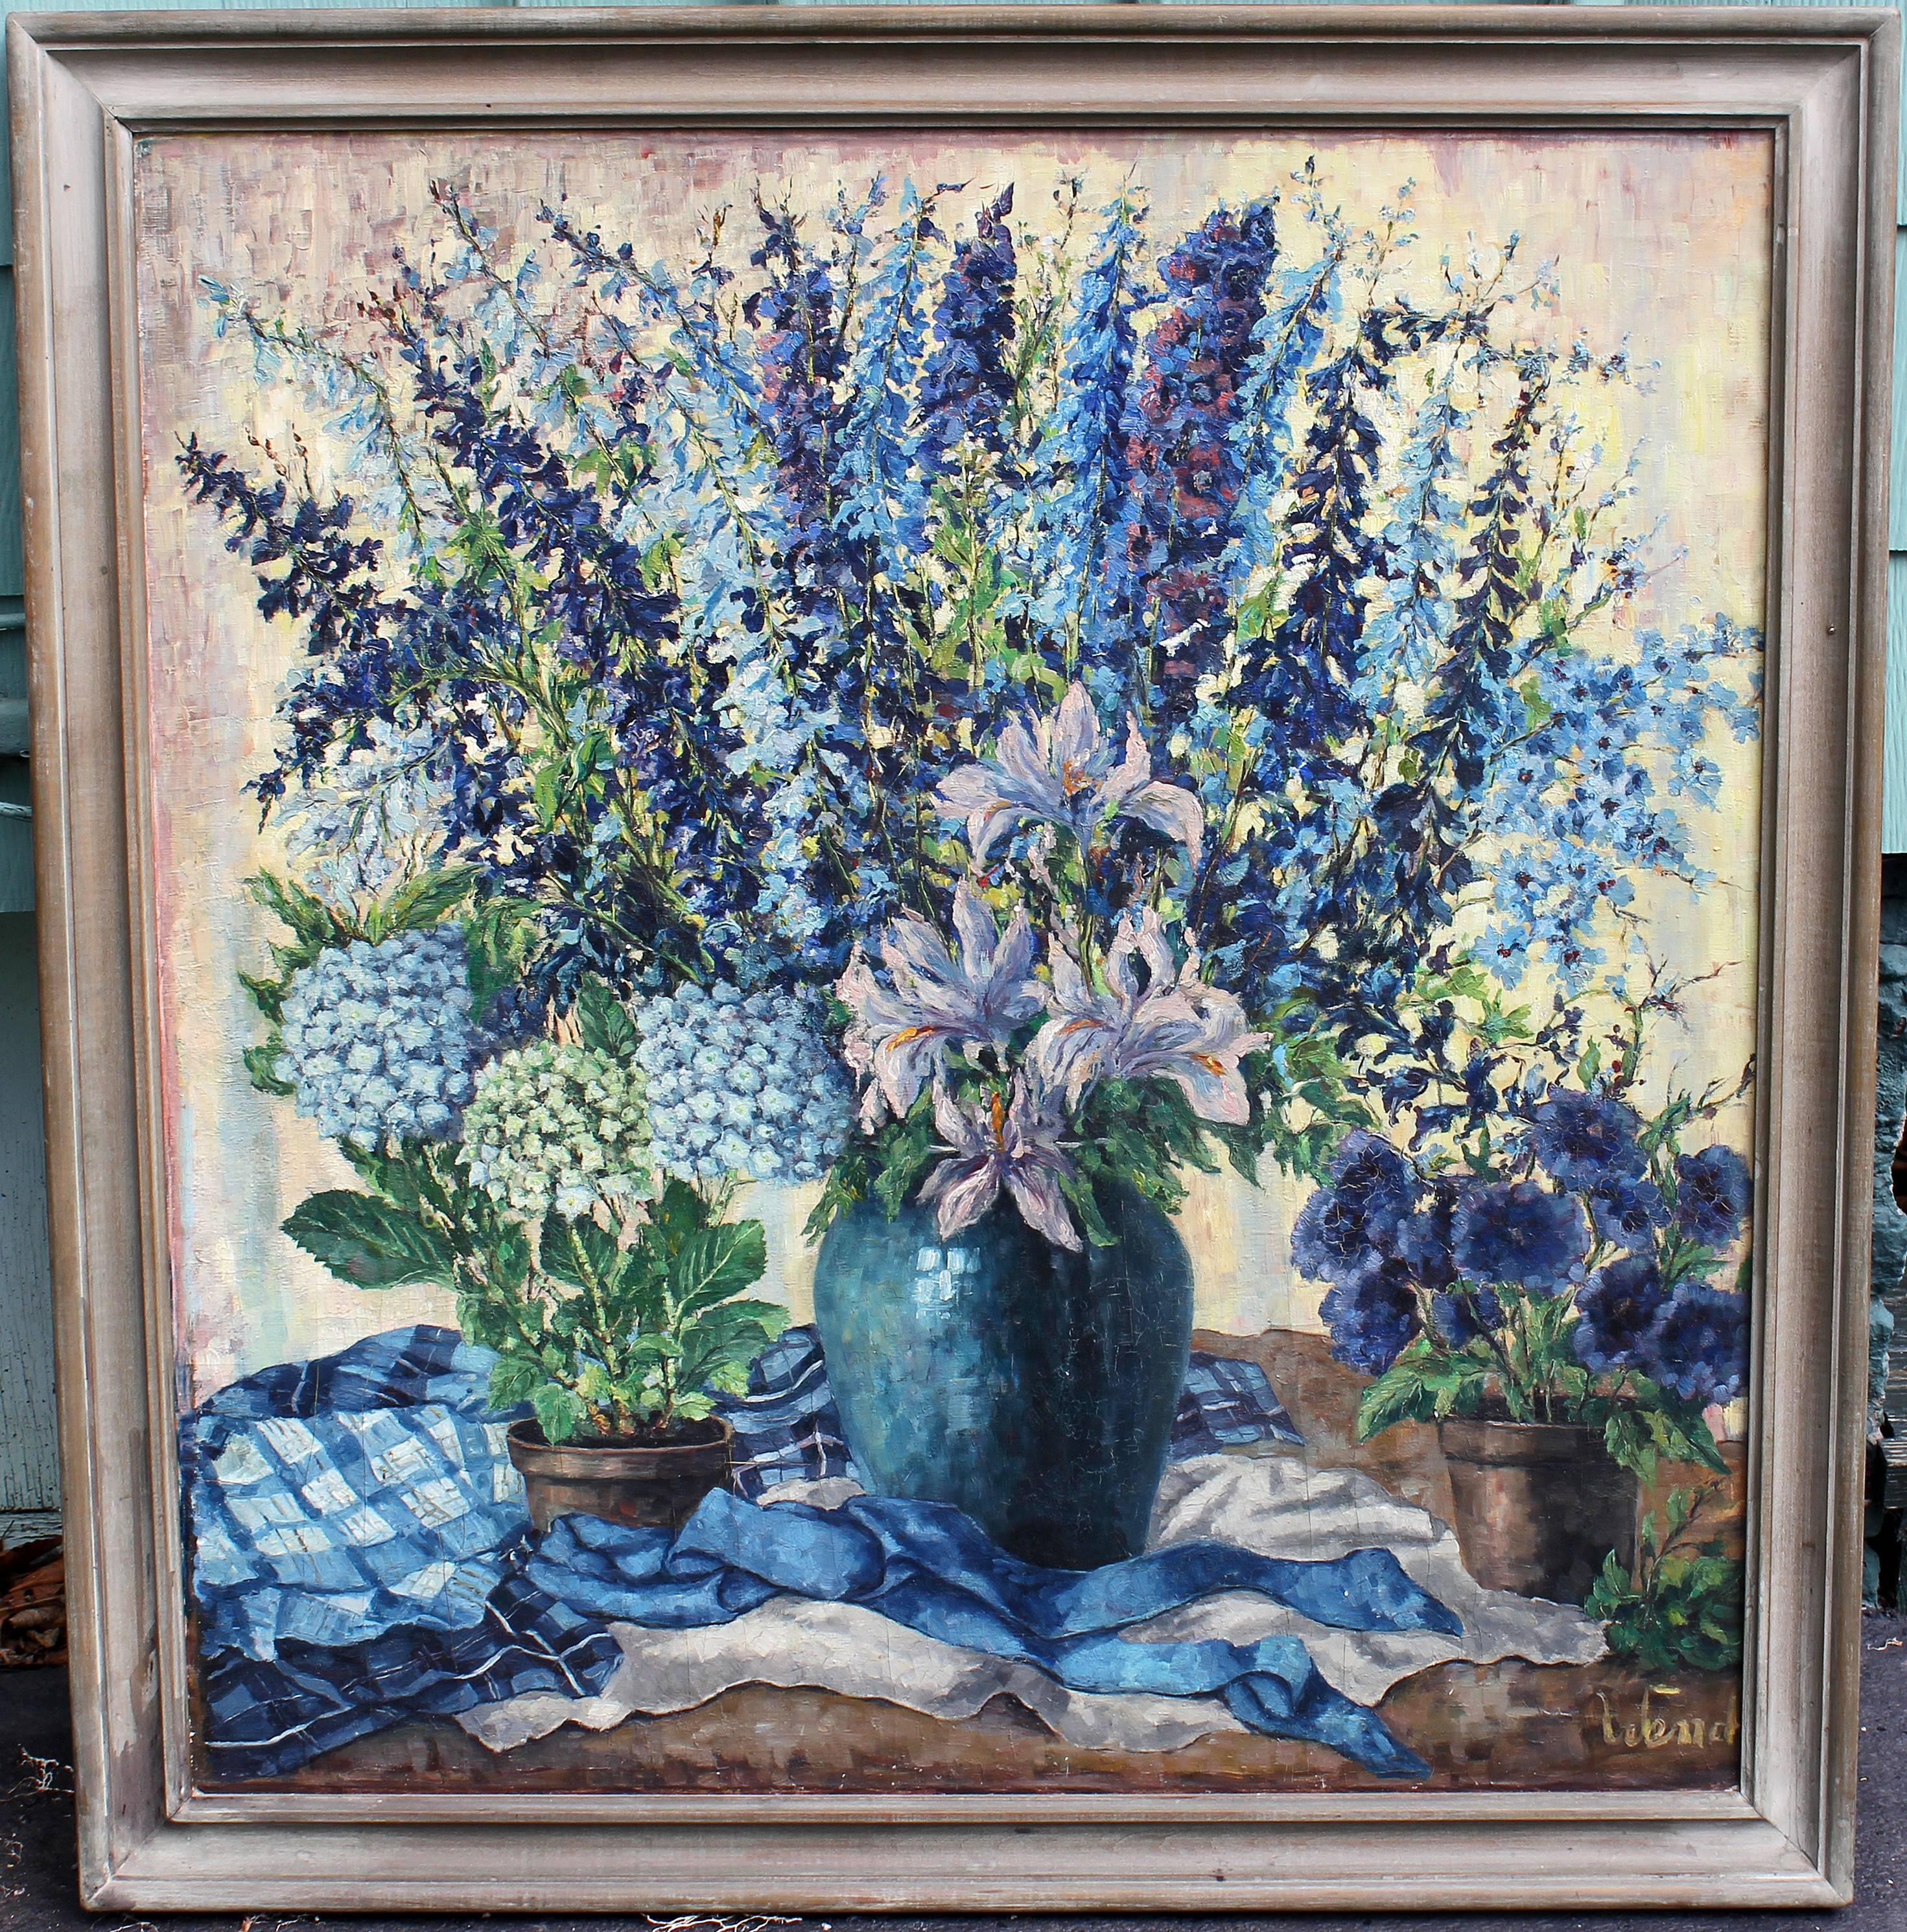 Large impressionist still life oil painting of various blue and lavender flowers, early 20th century. Oil on canvas. Signed Wendt.